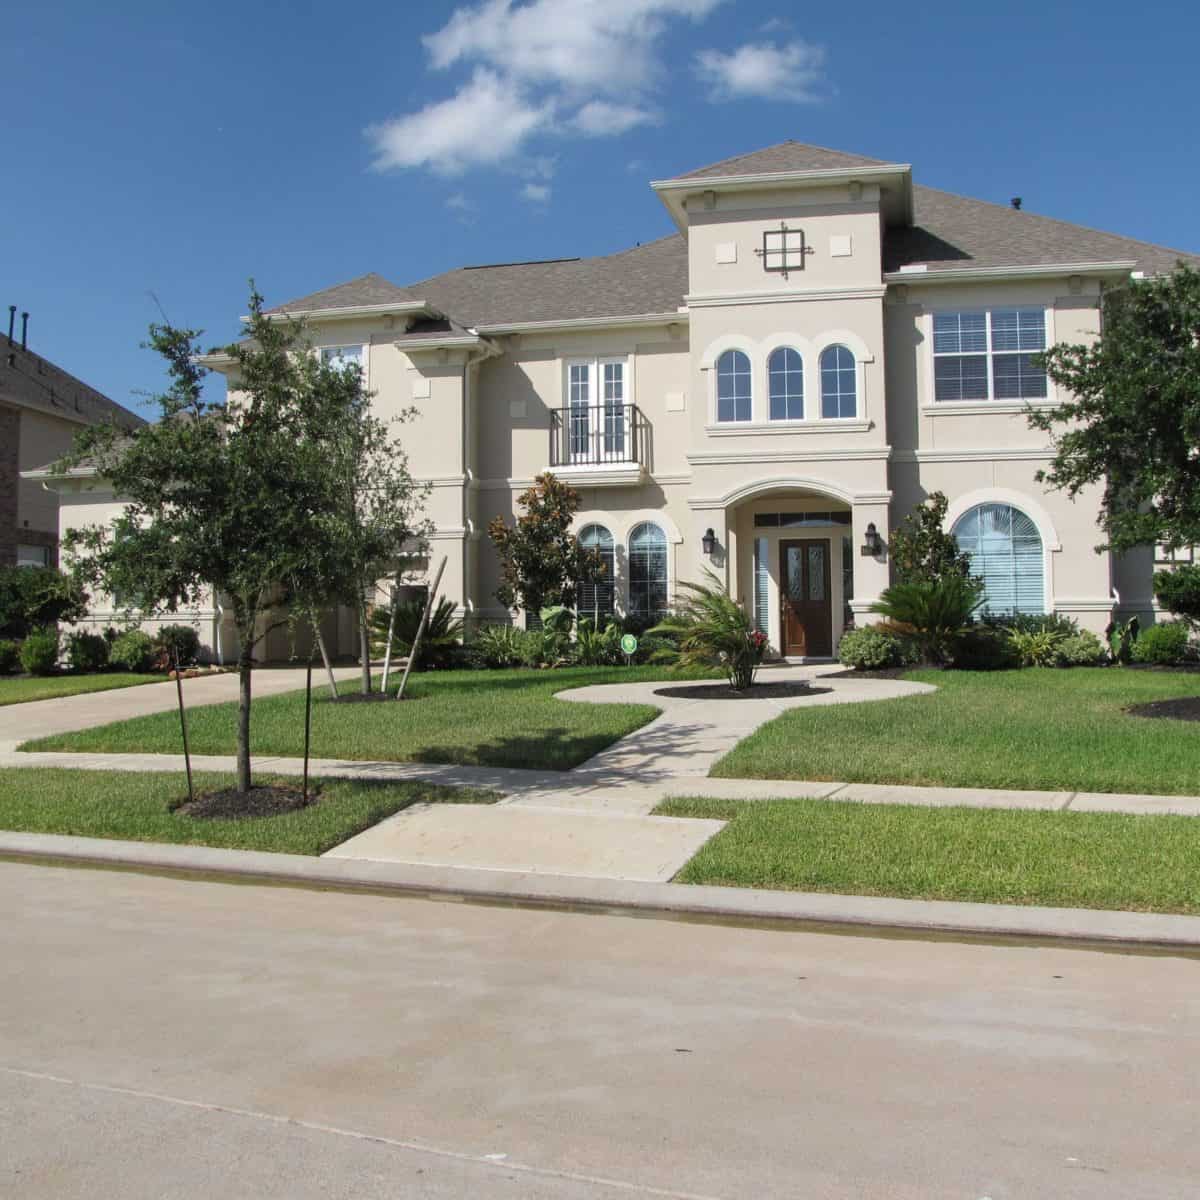 Home-For-Sale-in-Fairfield-in-Cypress-TX-1200x1200.jpg